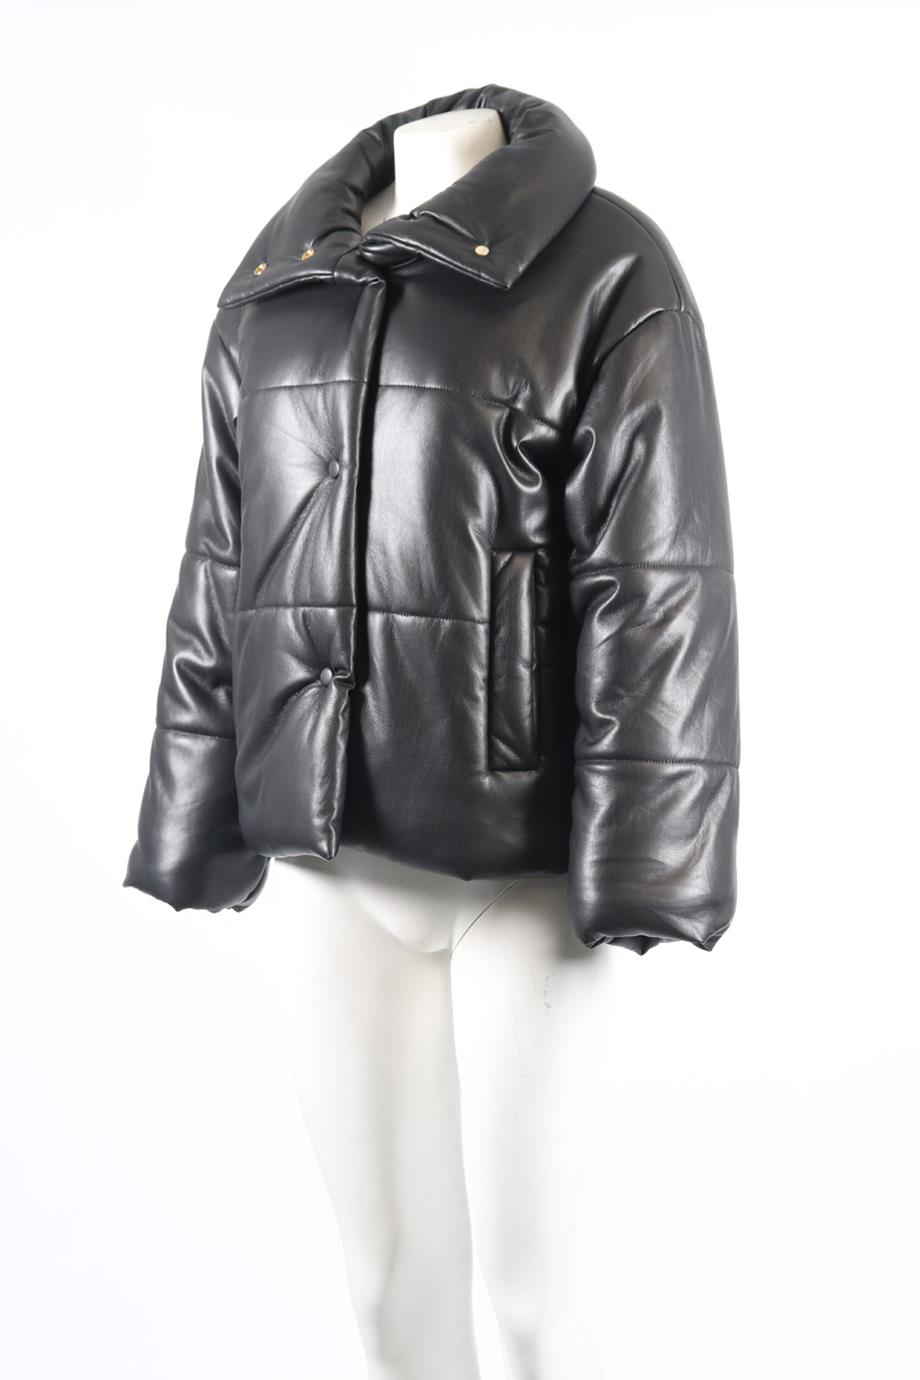 NANUSHKA QUILTED PADDED FAUX LEATHER JACKET SMALL